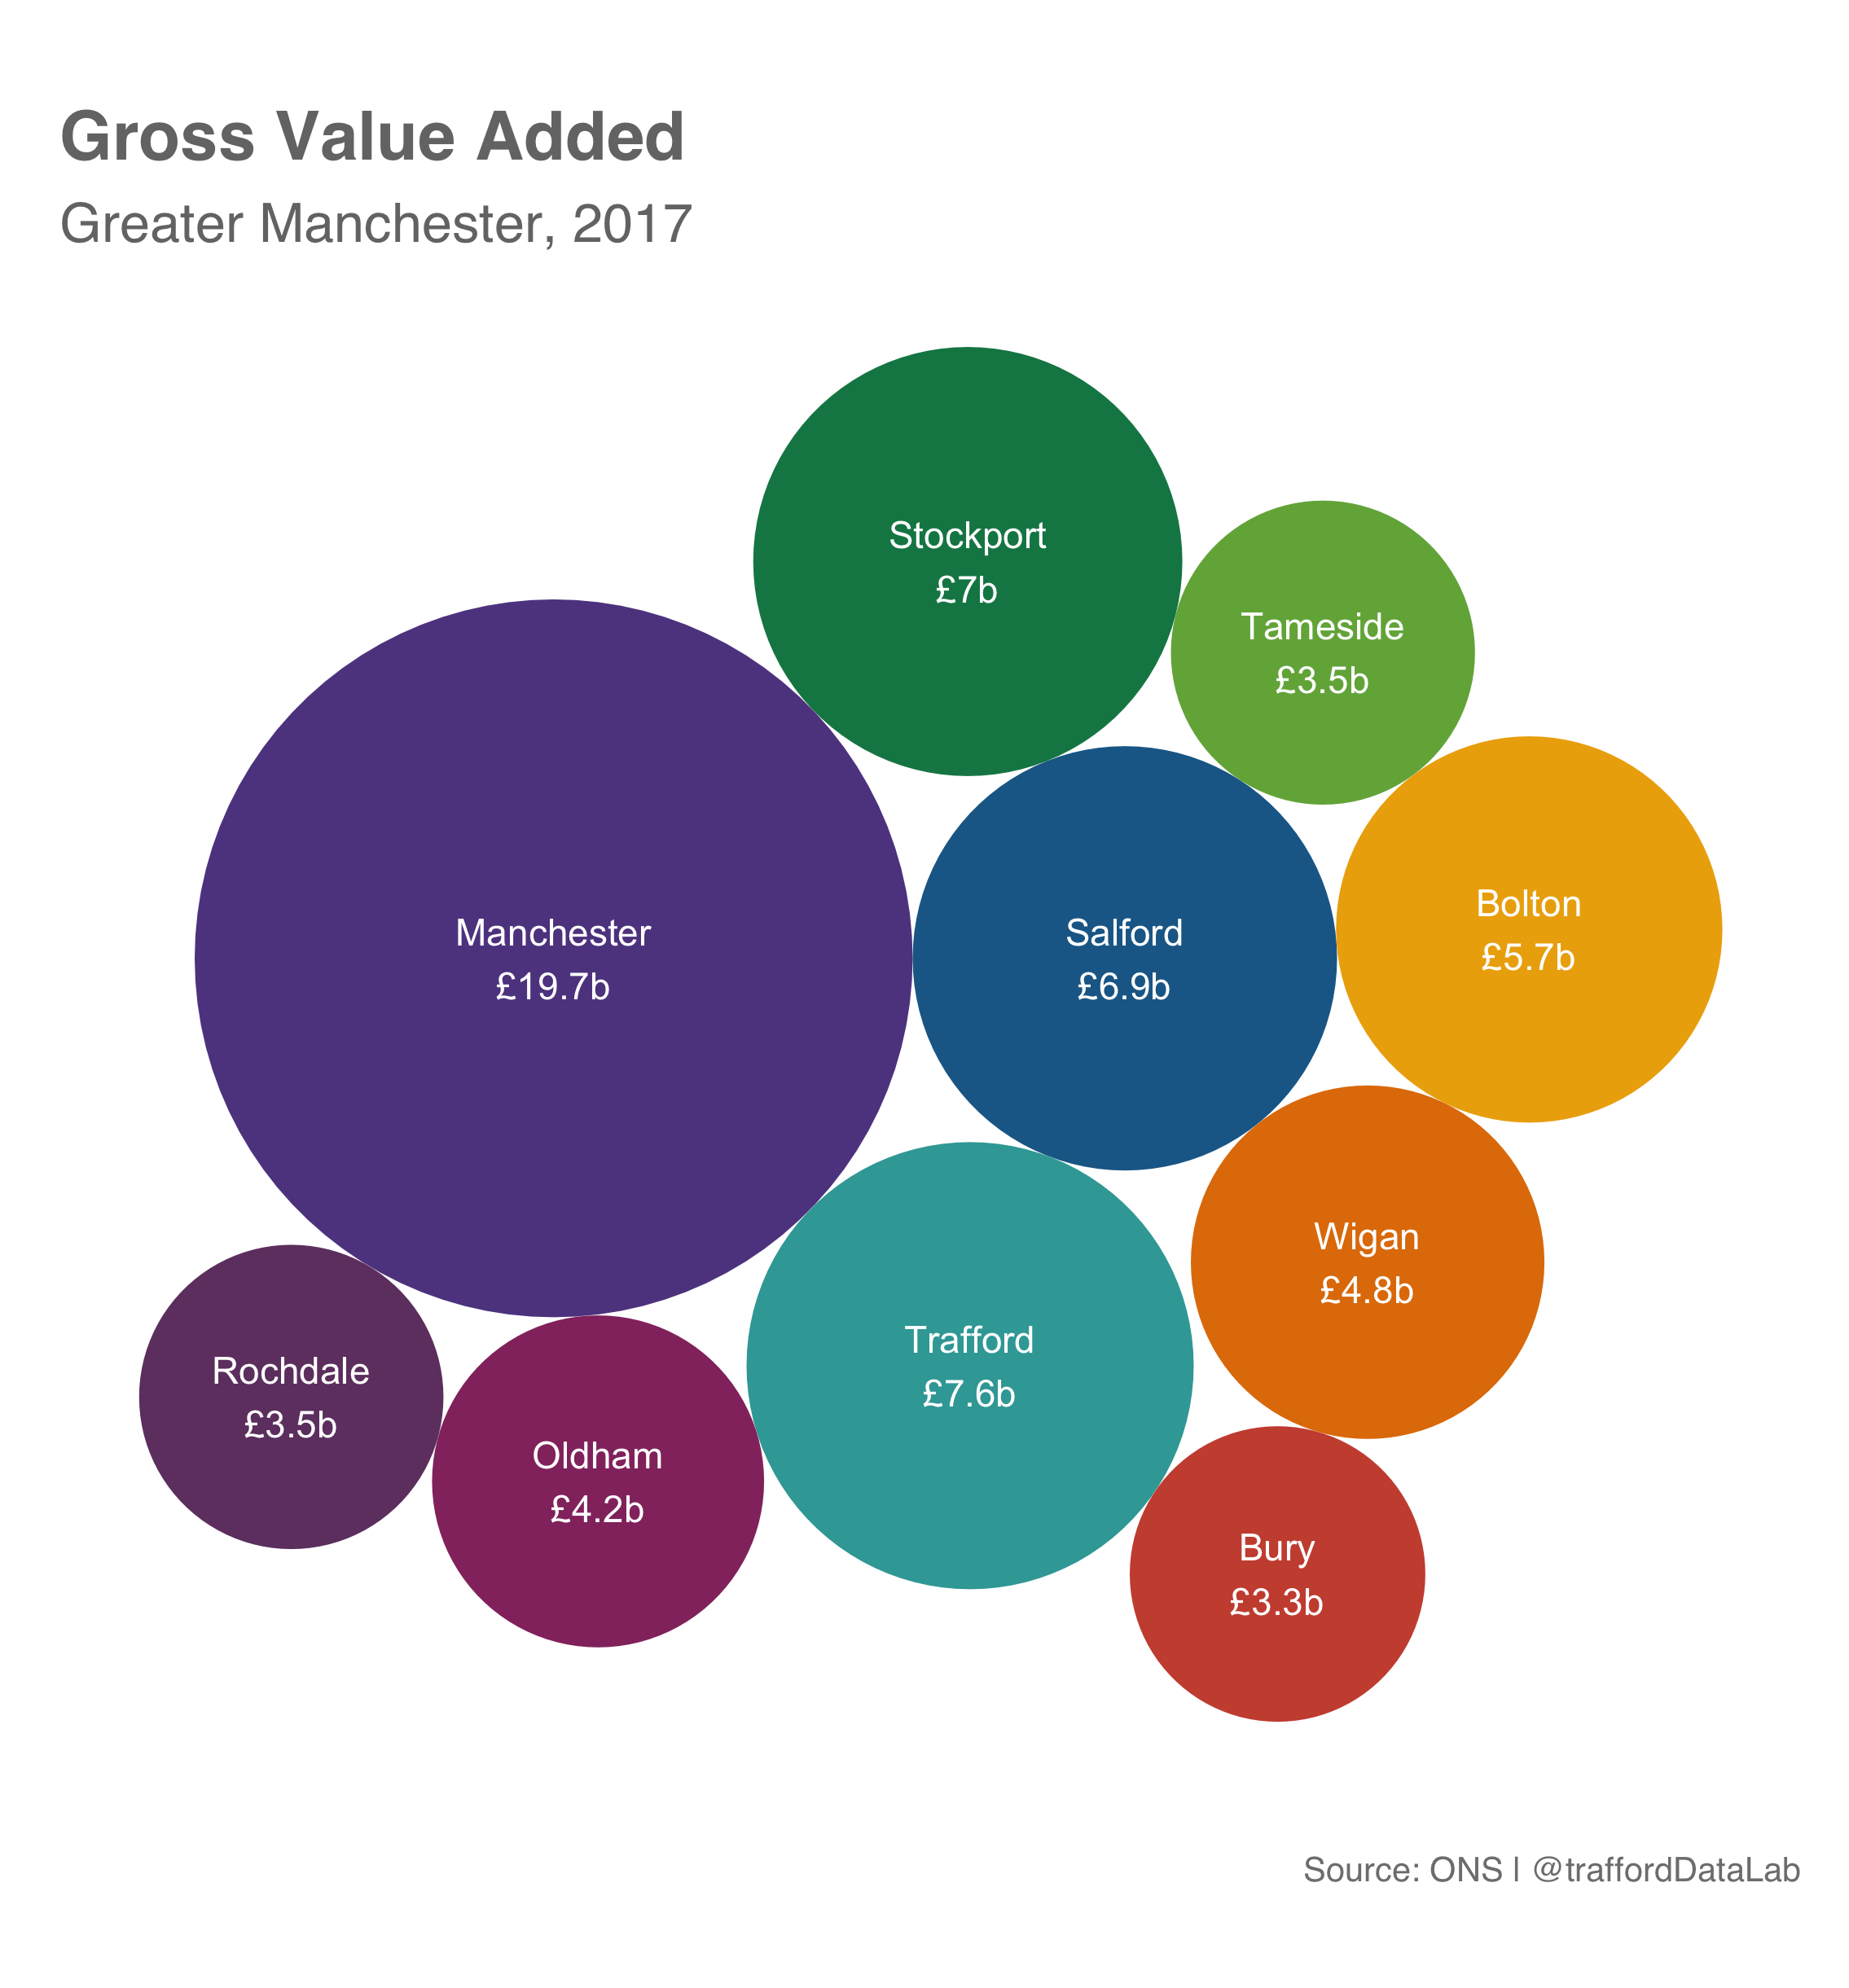 Gross Value Added of each Local Authority within Greater Manchester in 2017.